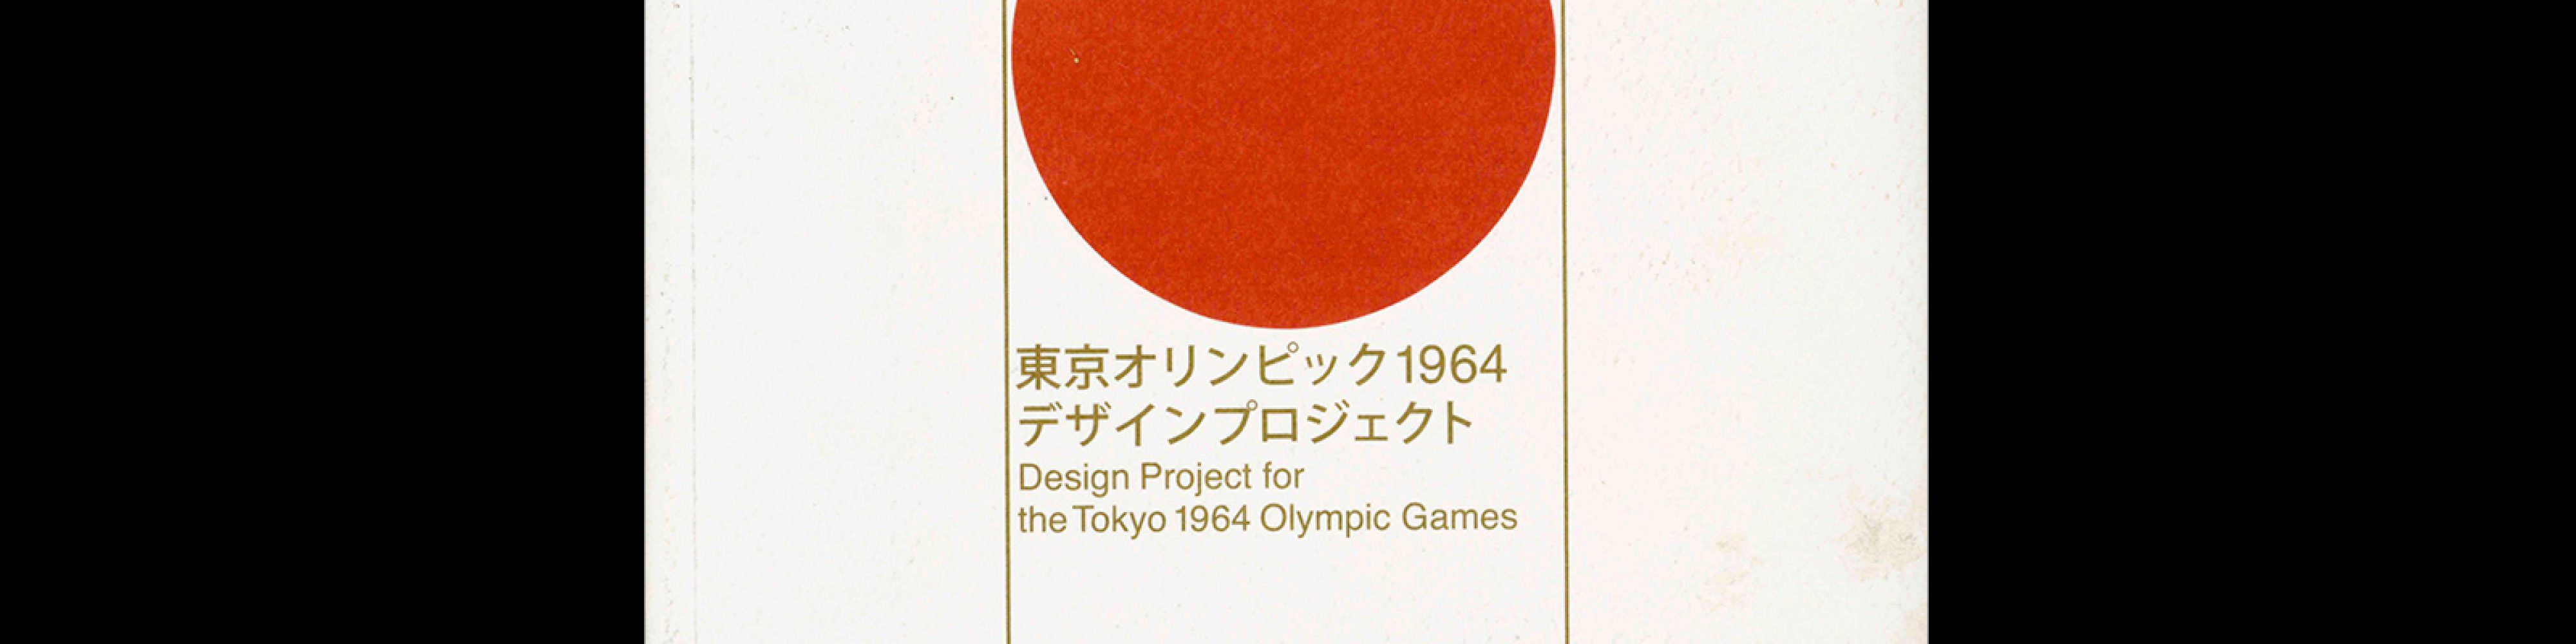 Design Project for the Tokyo 1964 Olympic Games, 2013